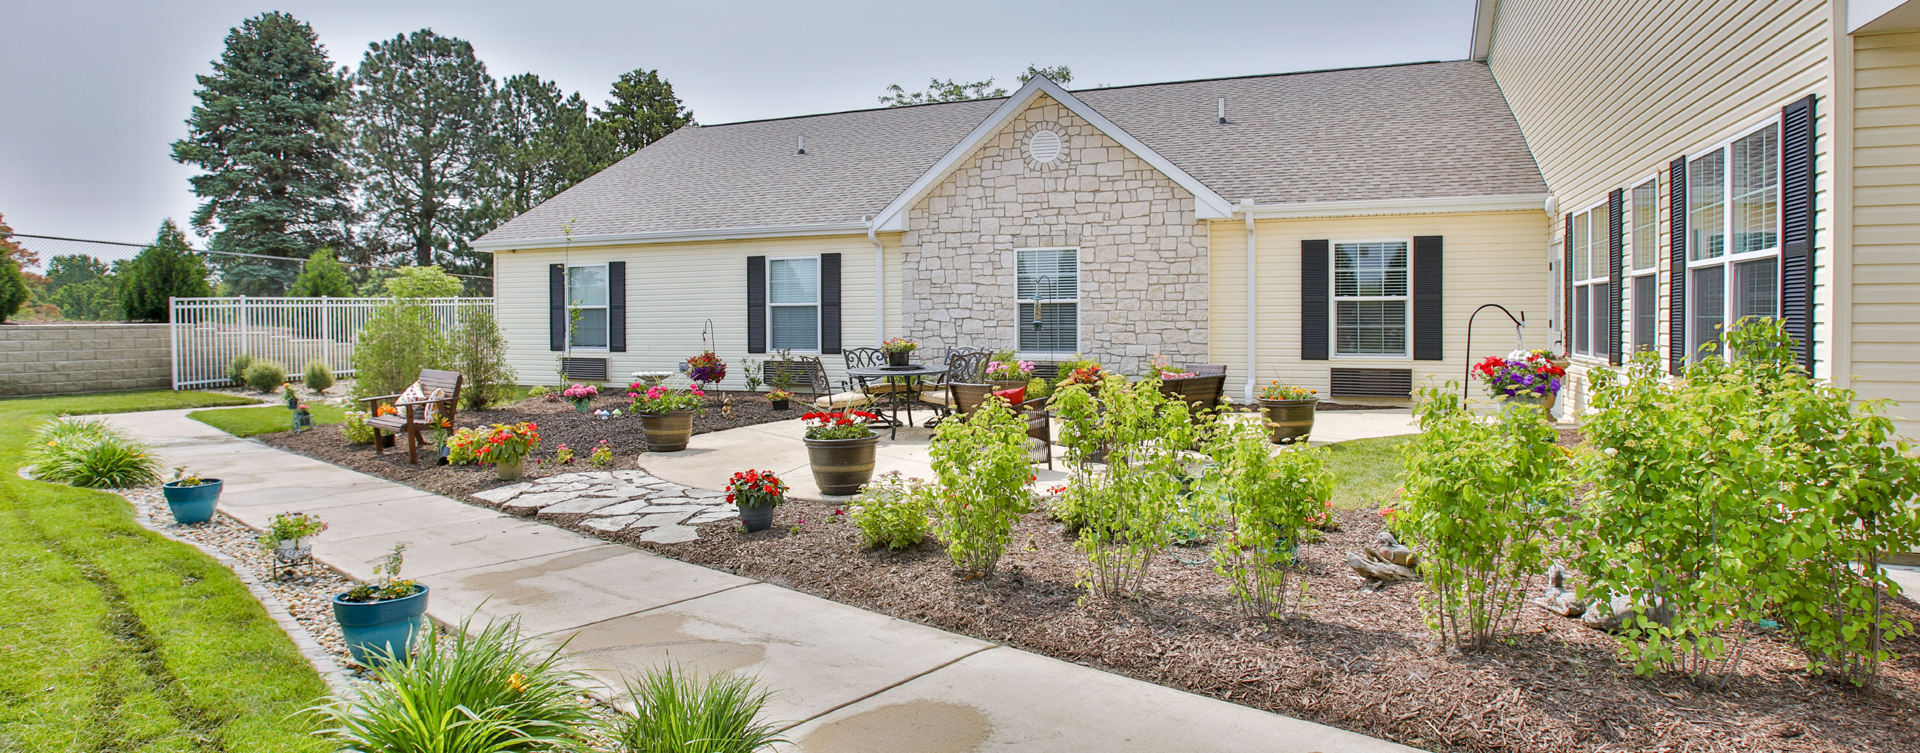 Residents with dementia can enjoy a traveling path, relaxed seating and raised garden beds in the courtyard at Bickford of Bloomington